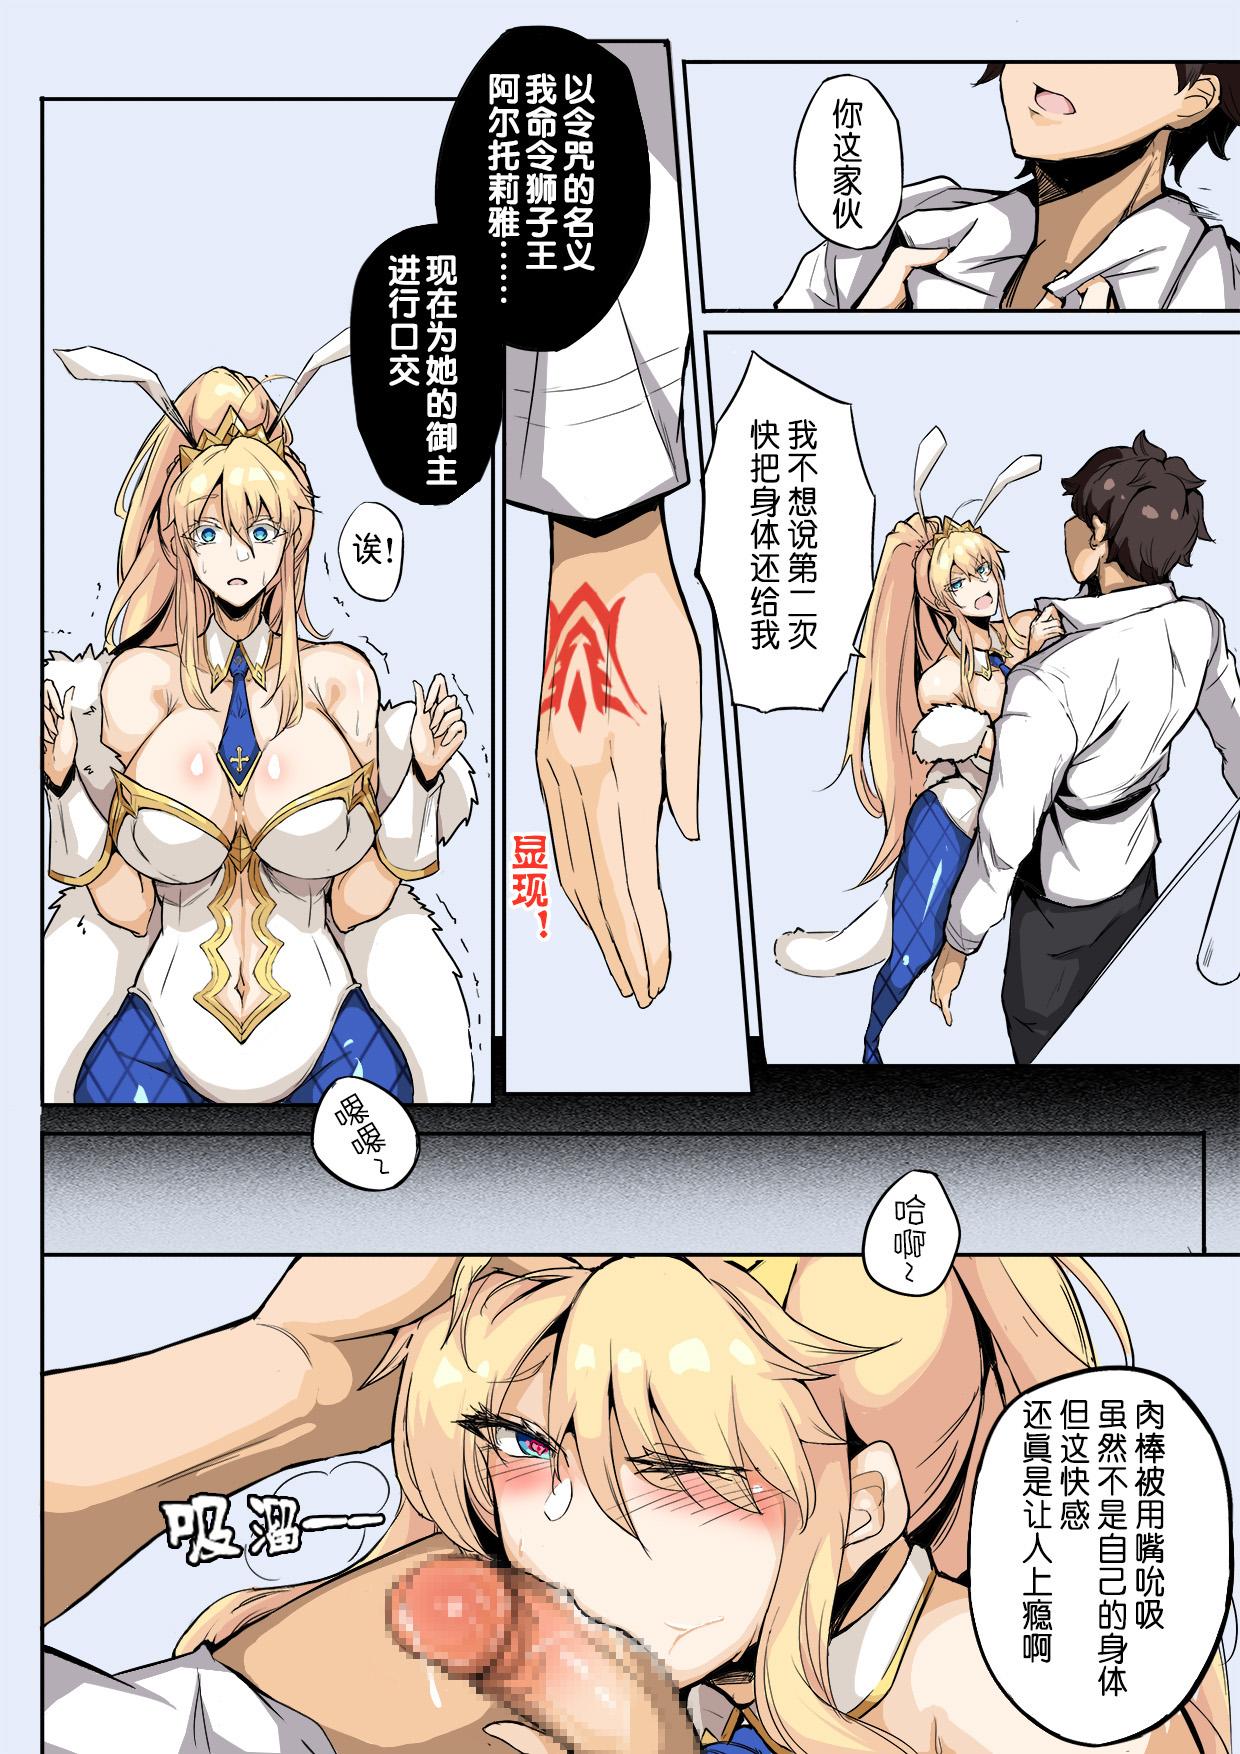 Ass Licking fate 黑胡子的阴谋 - Fate grand order Teen Sex - Page 8